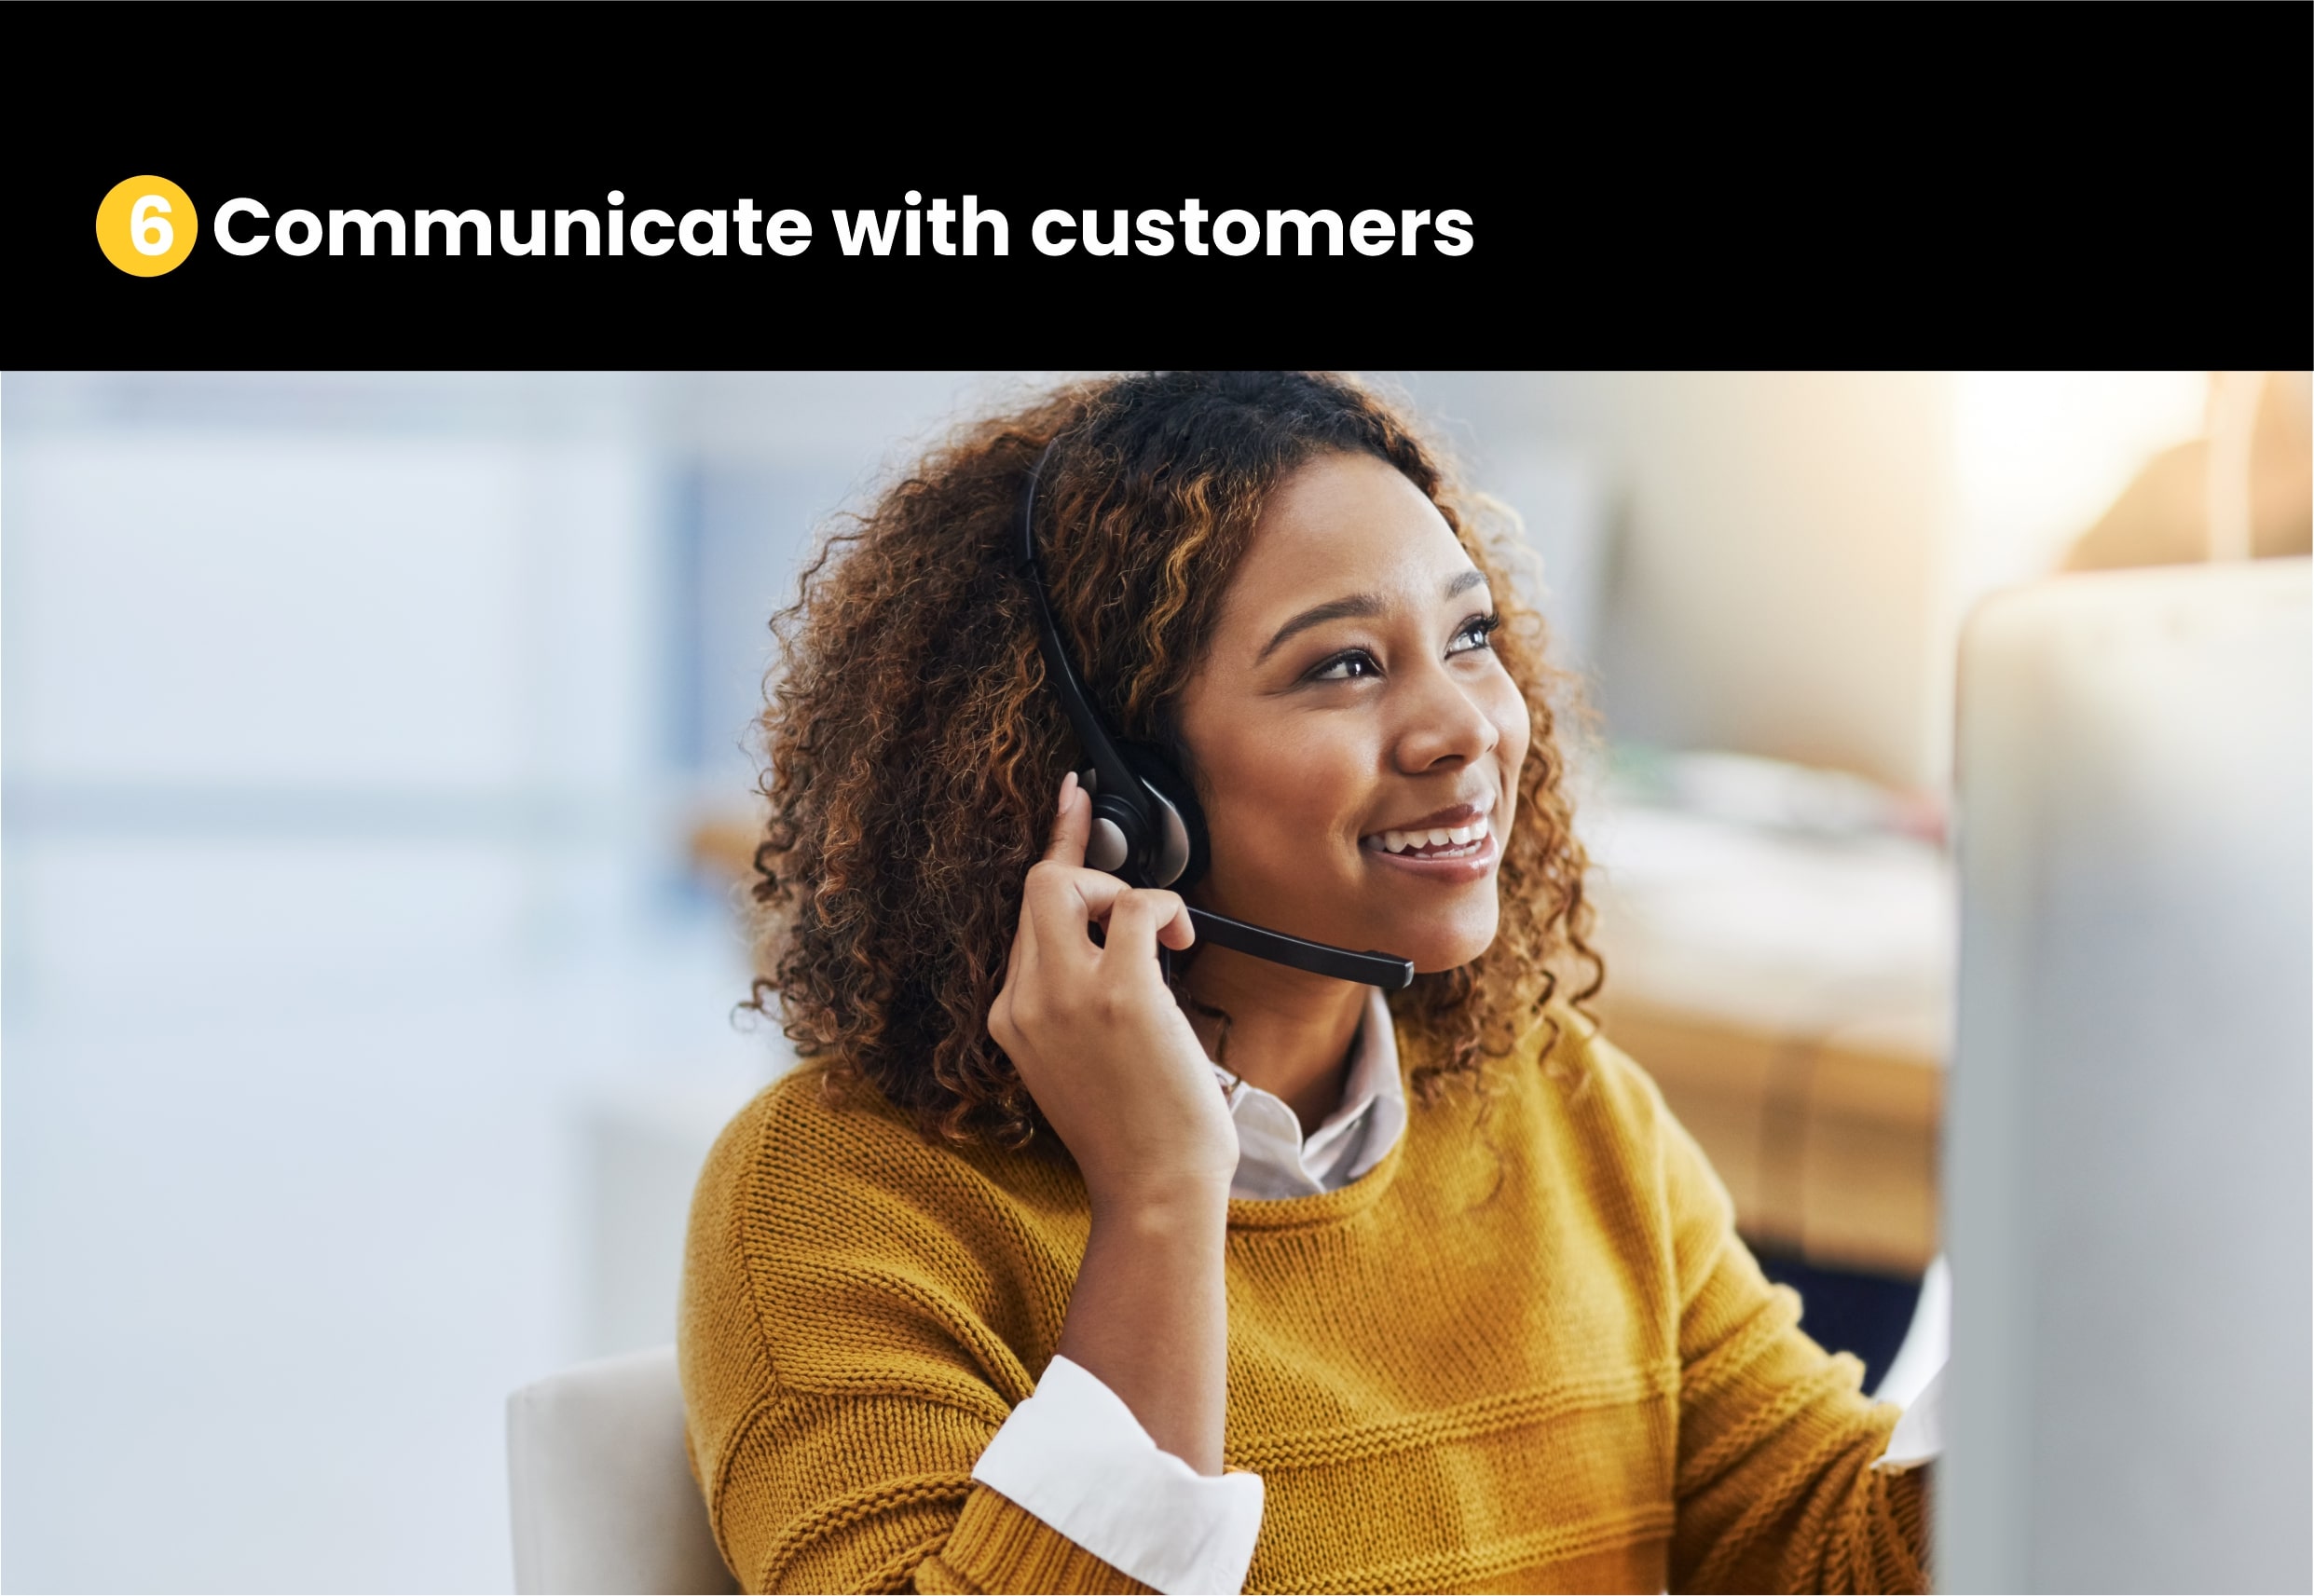 Communicate with customers: